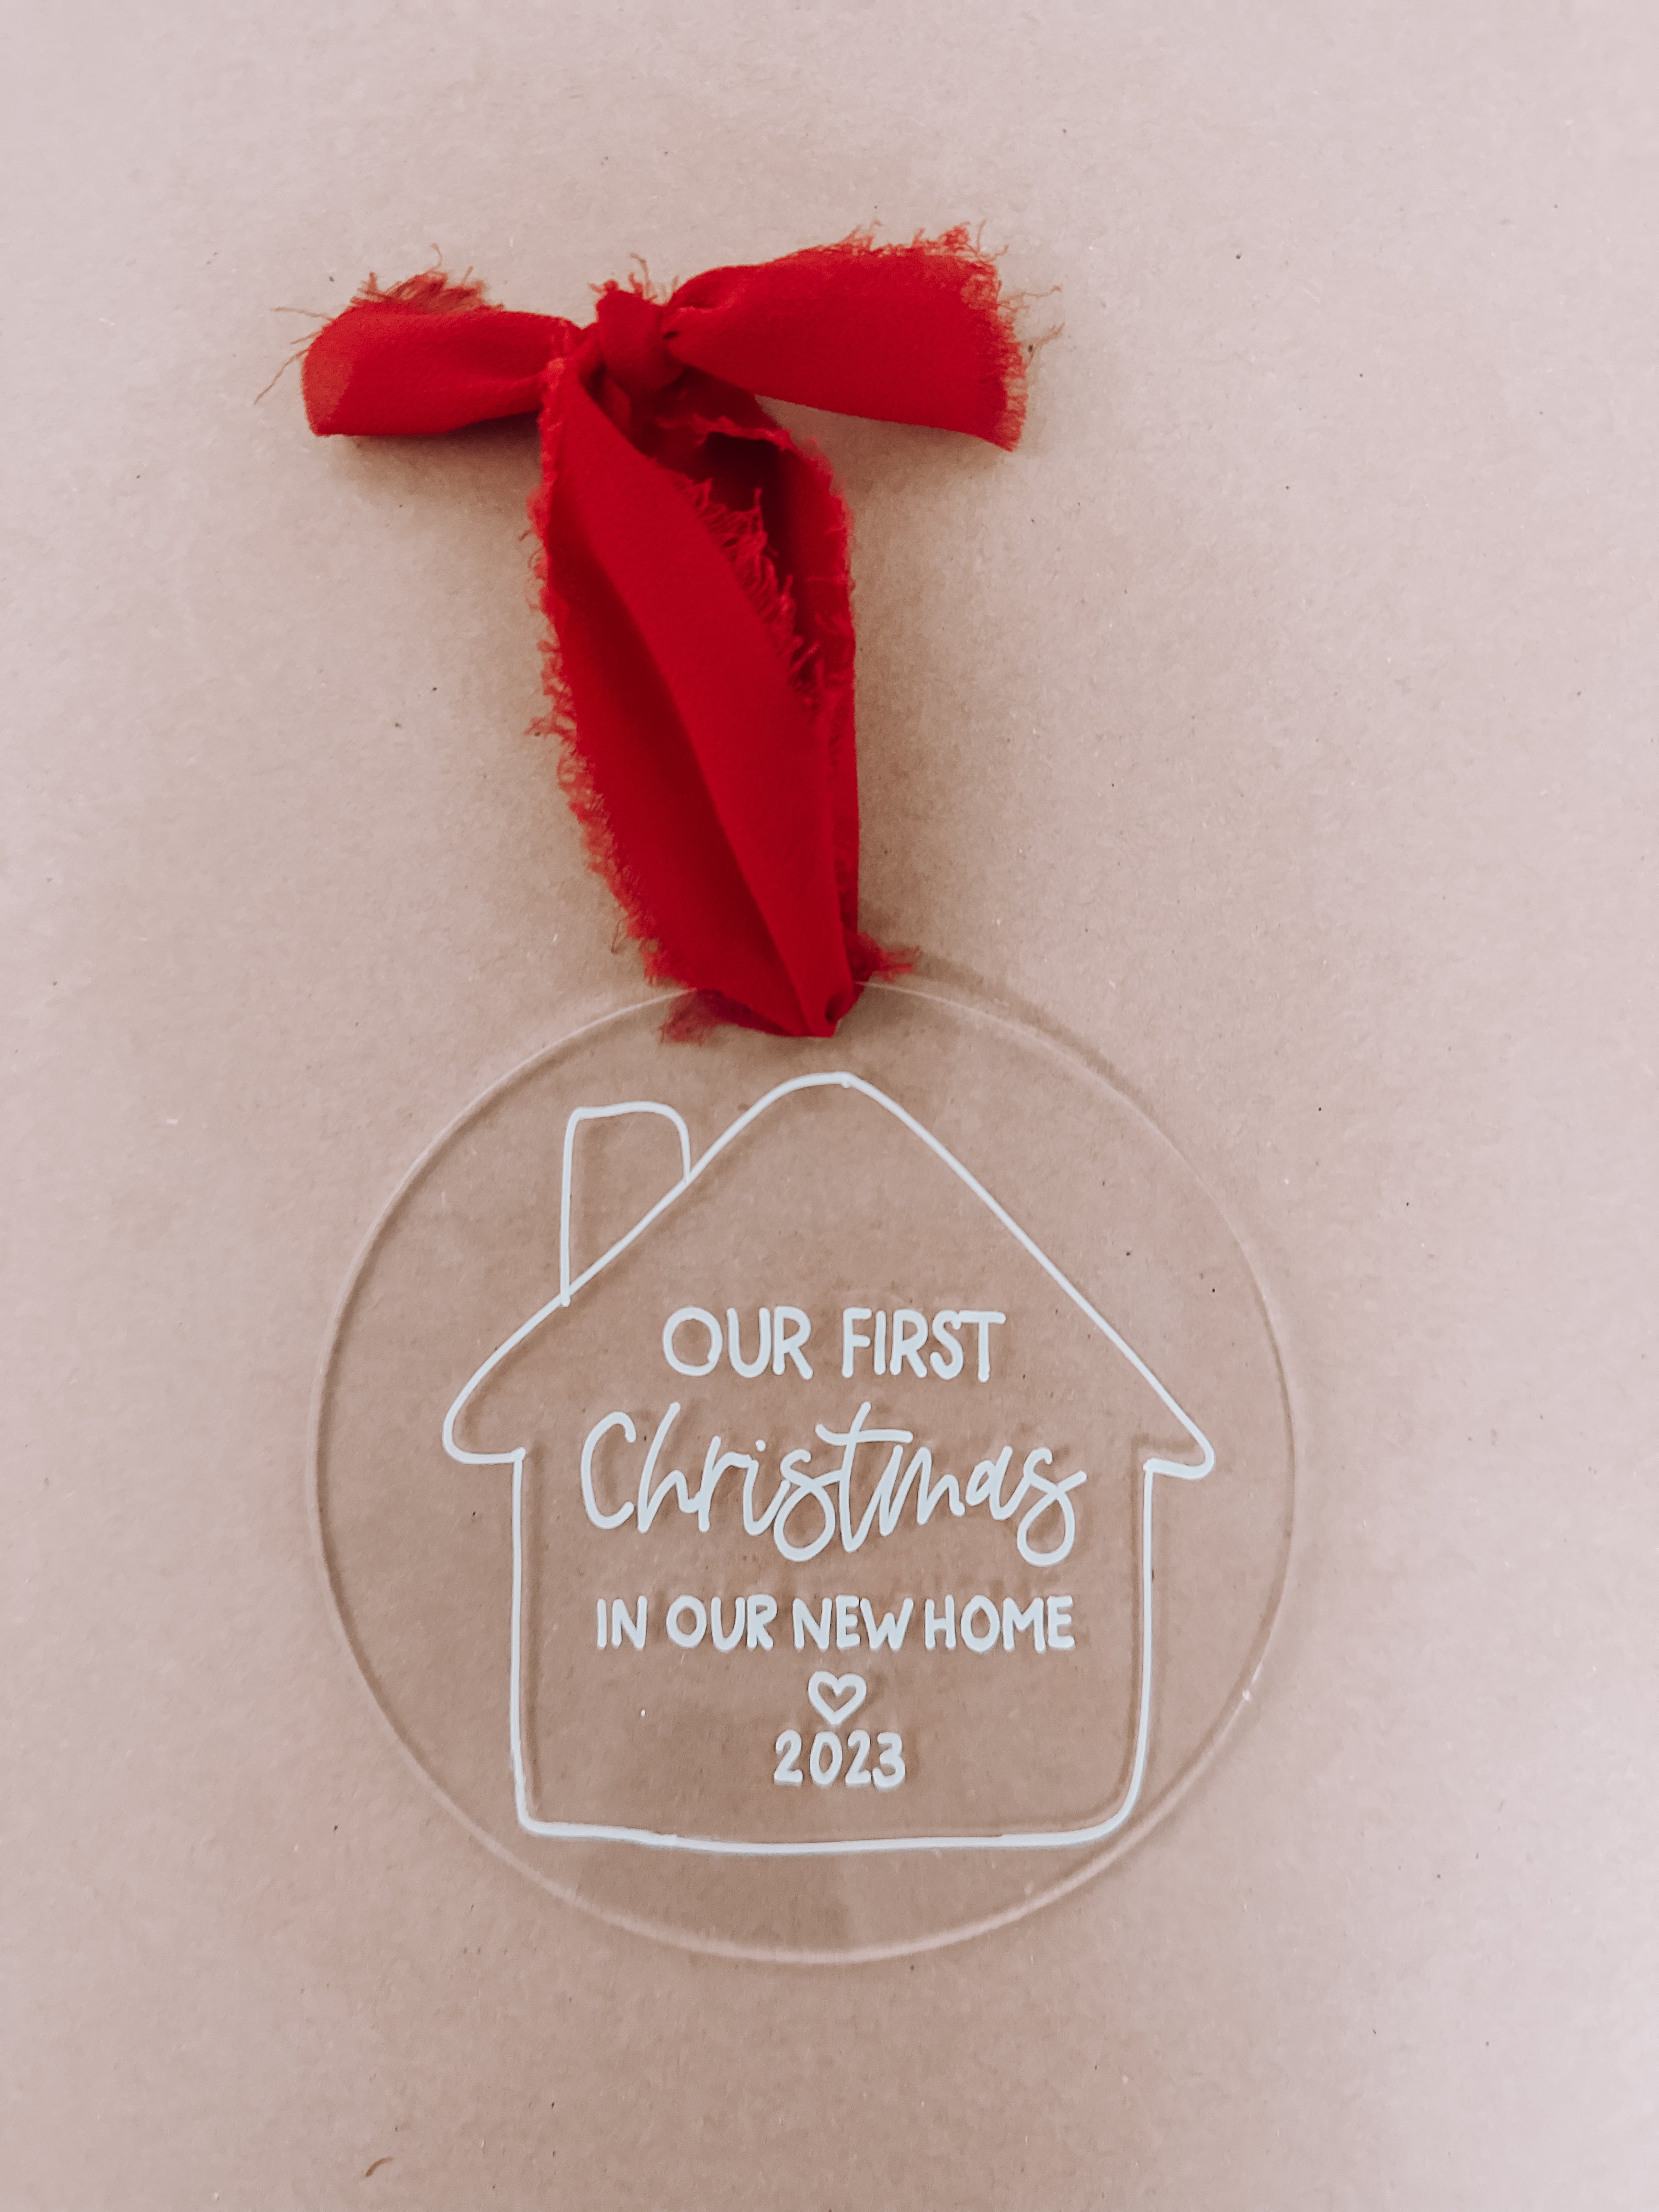 Our First Christmas In Our New Home 2023 Acrylic Christmas Ornament